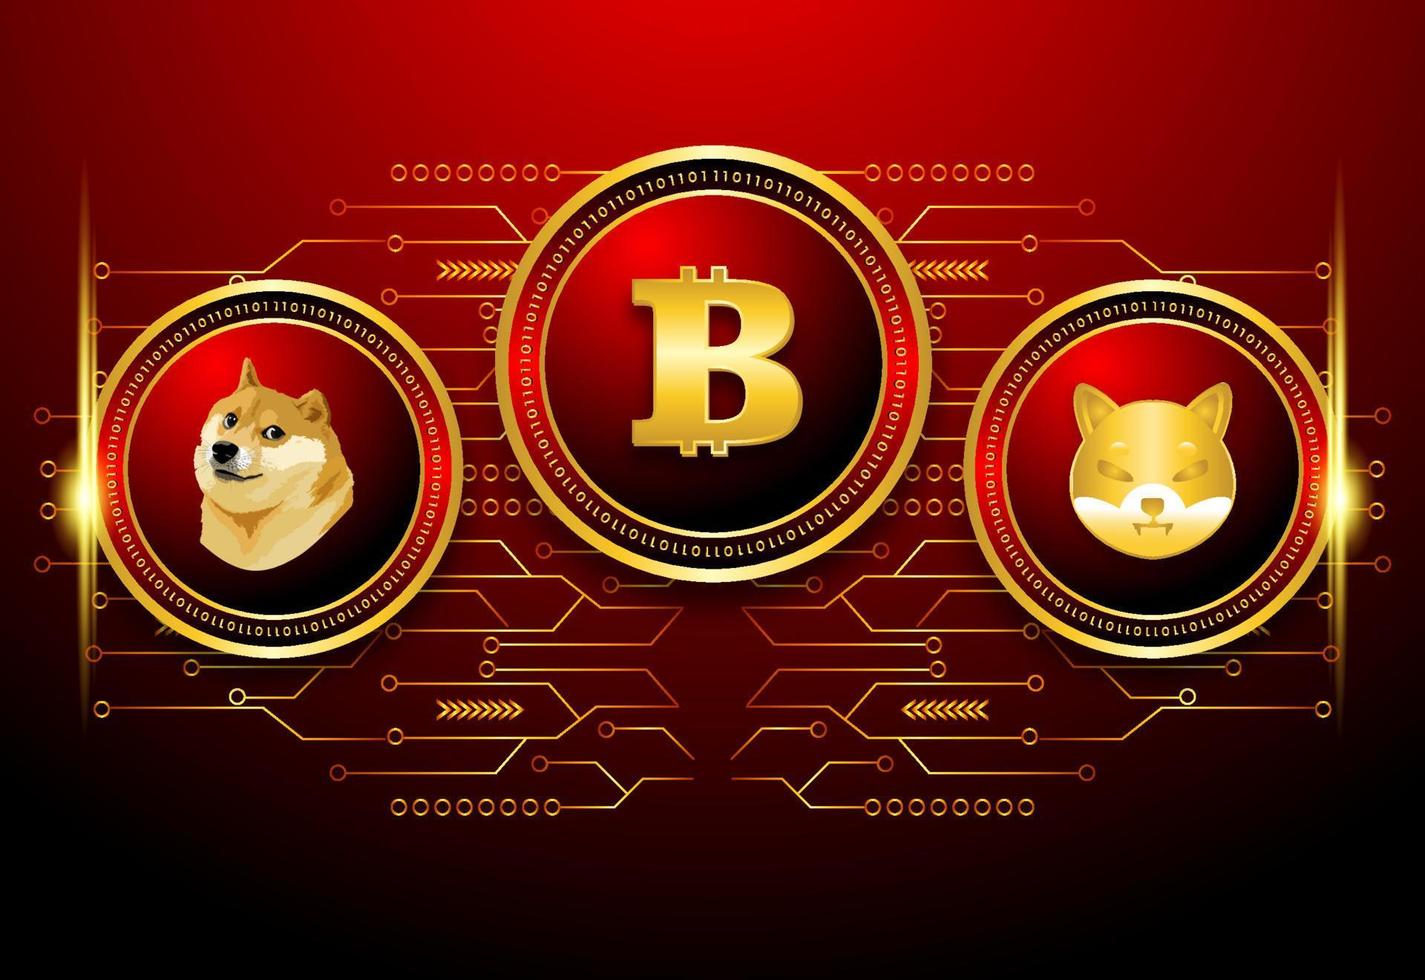 bitcoin versus doge meme crypto currency illustration vector